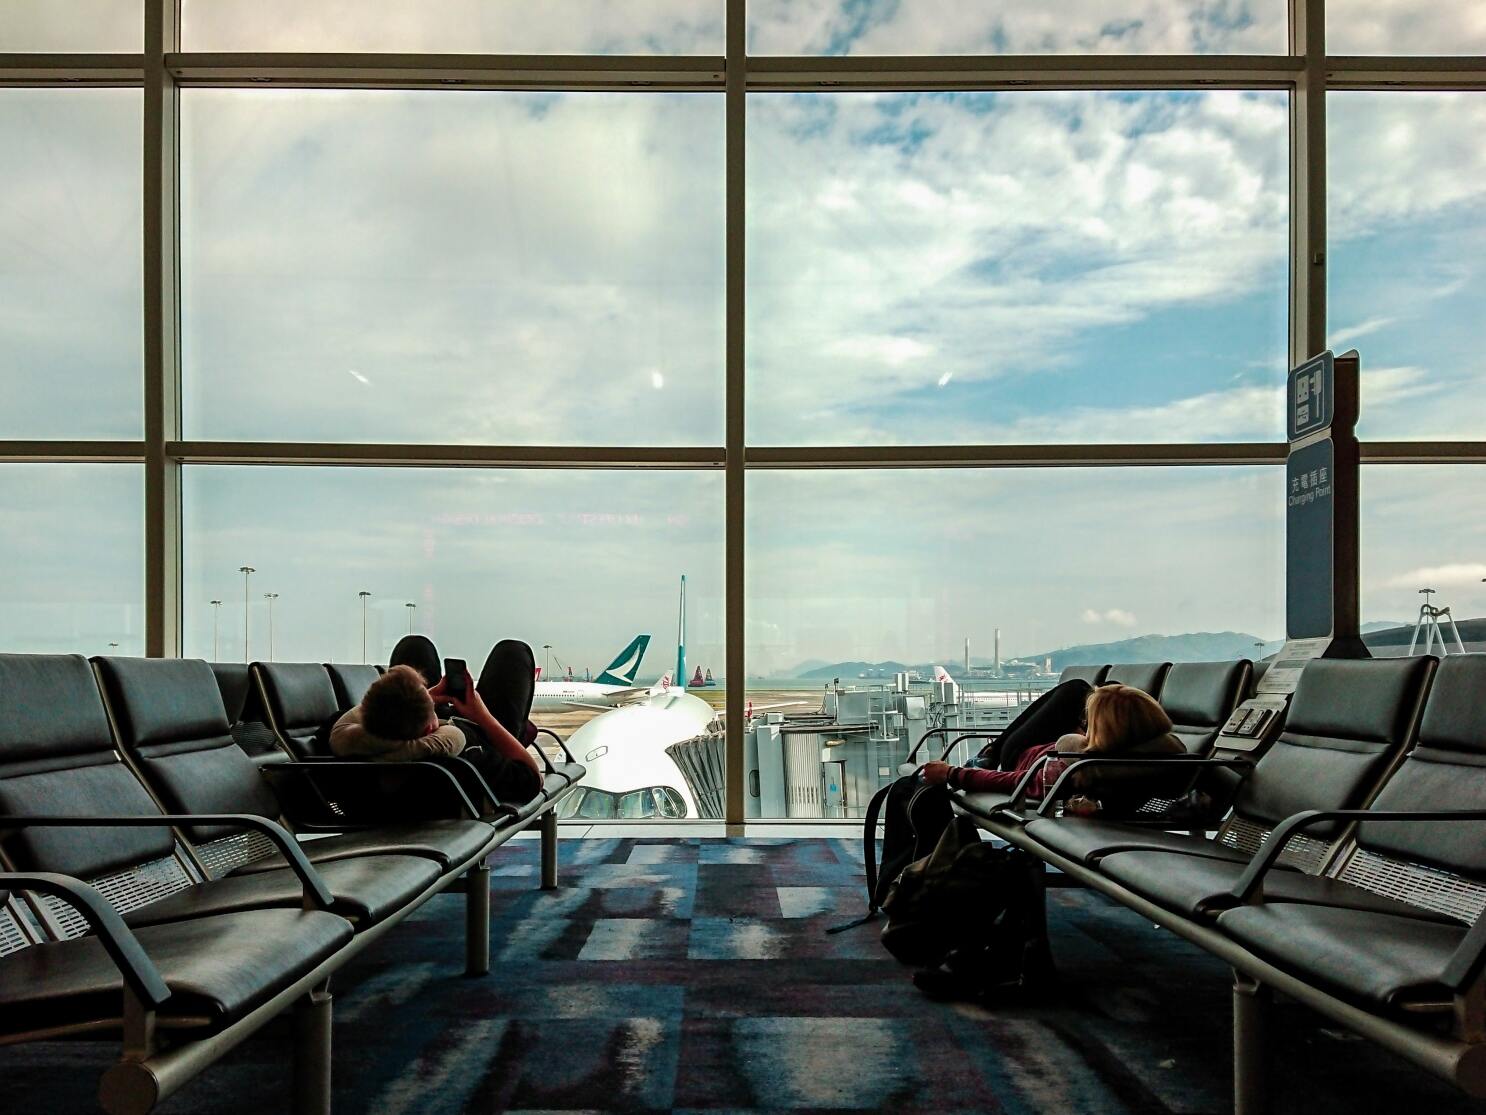 How To Prepare For And Avoid Flight Delays And Cancellations?